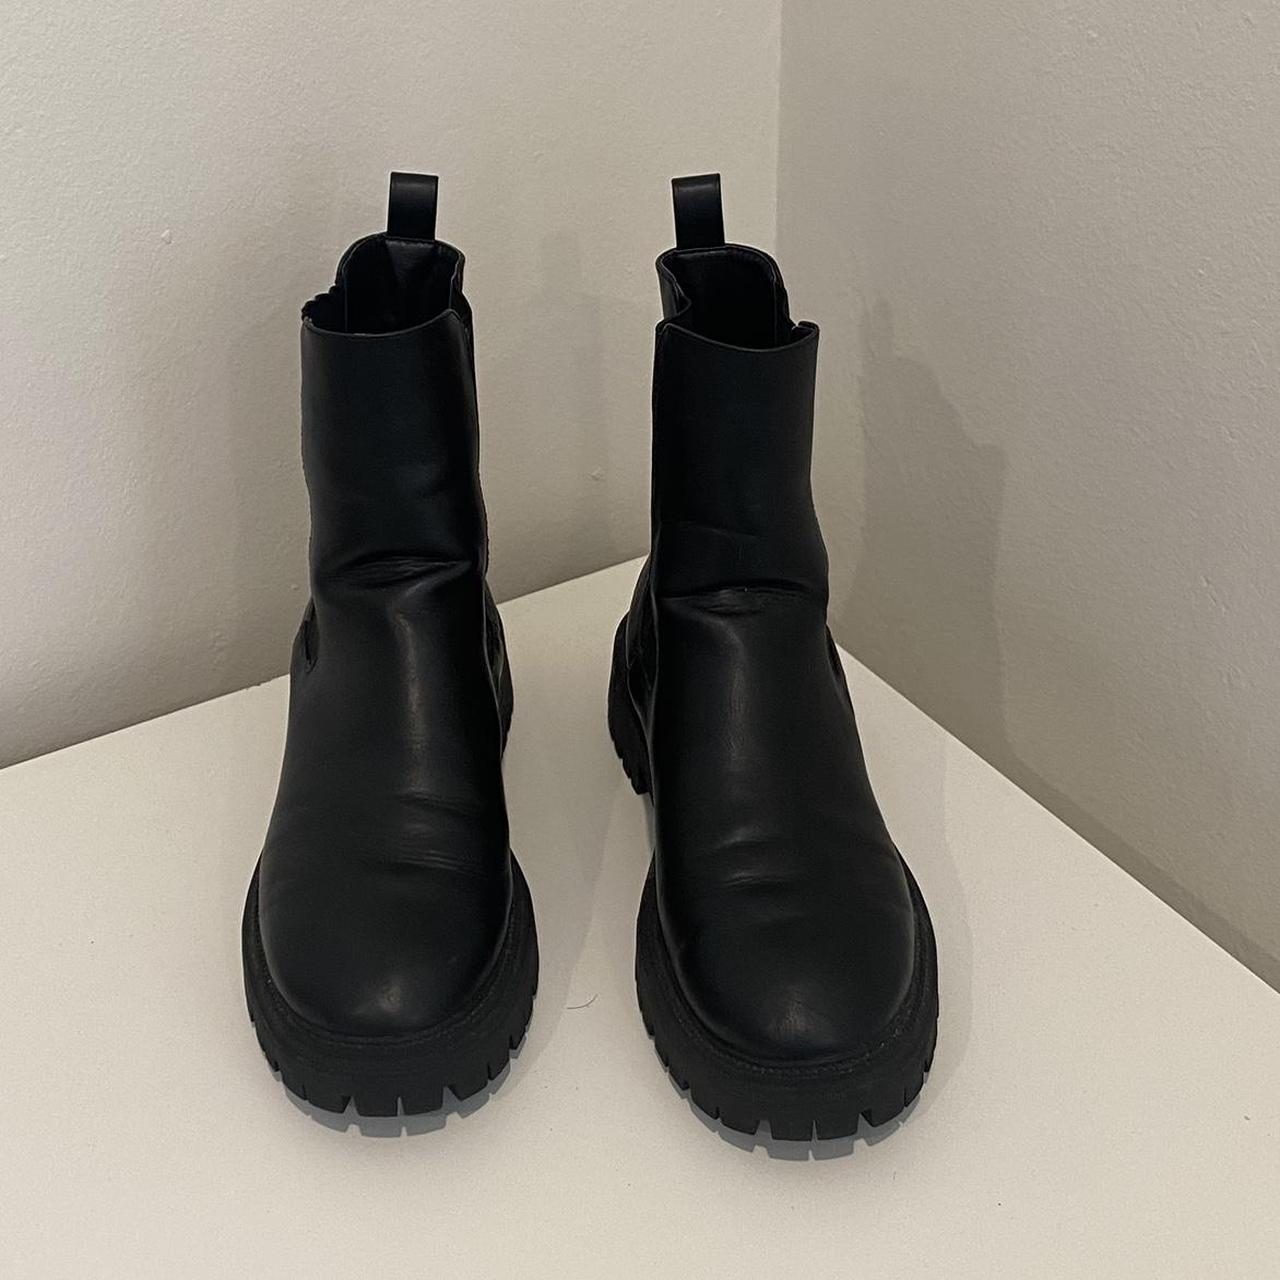 Alice in the Eve chunky black leather boots Worn a... - Depop